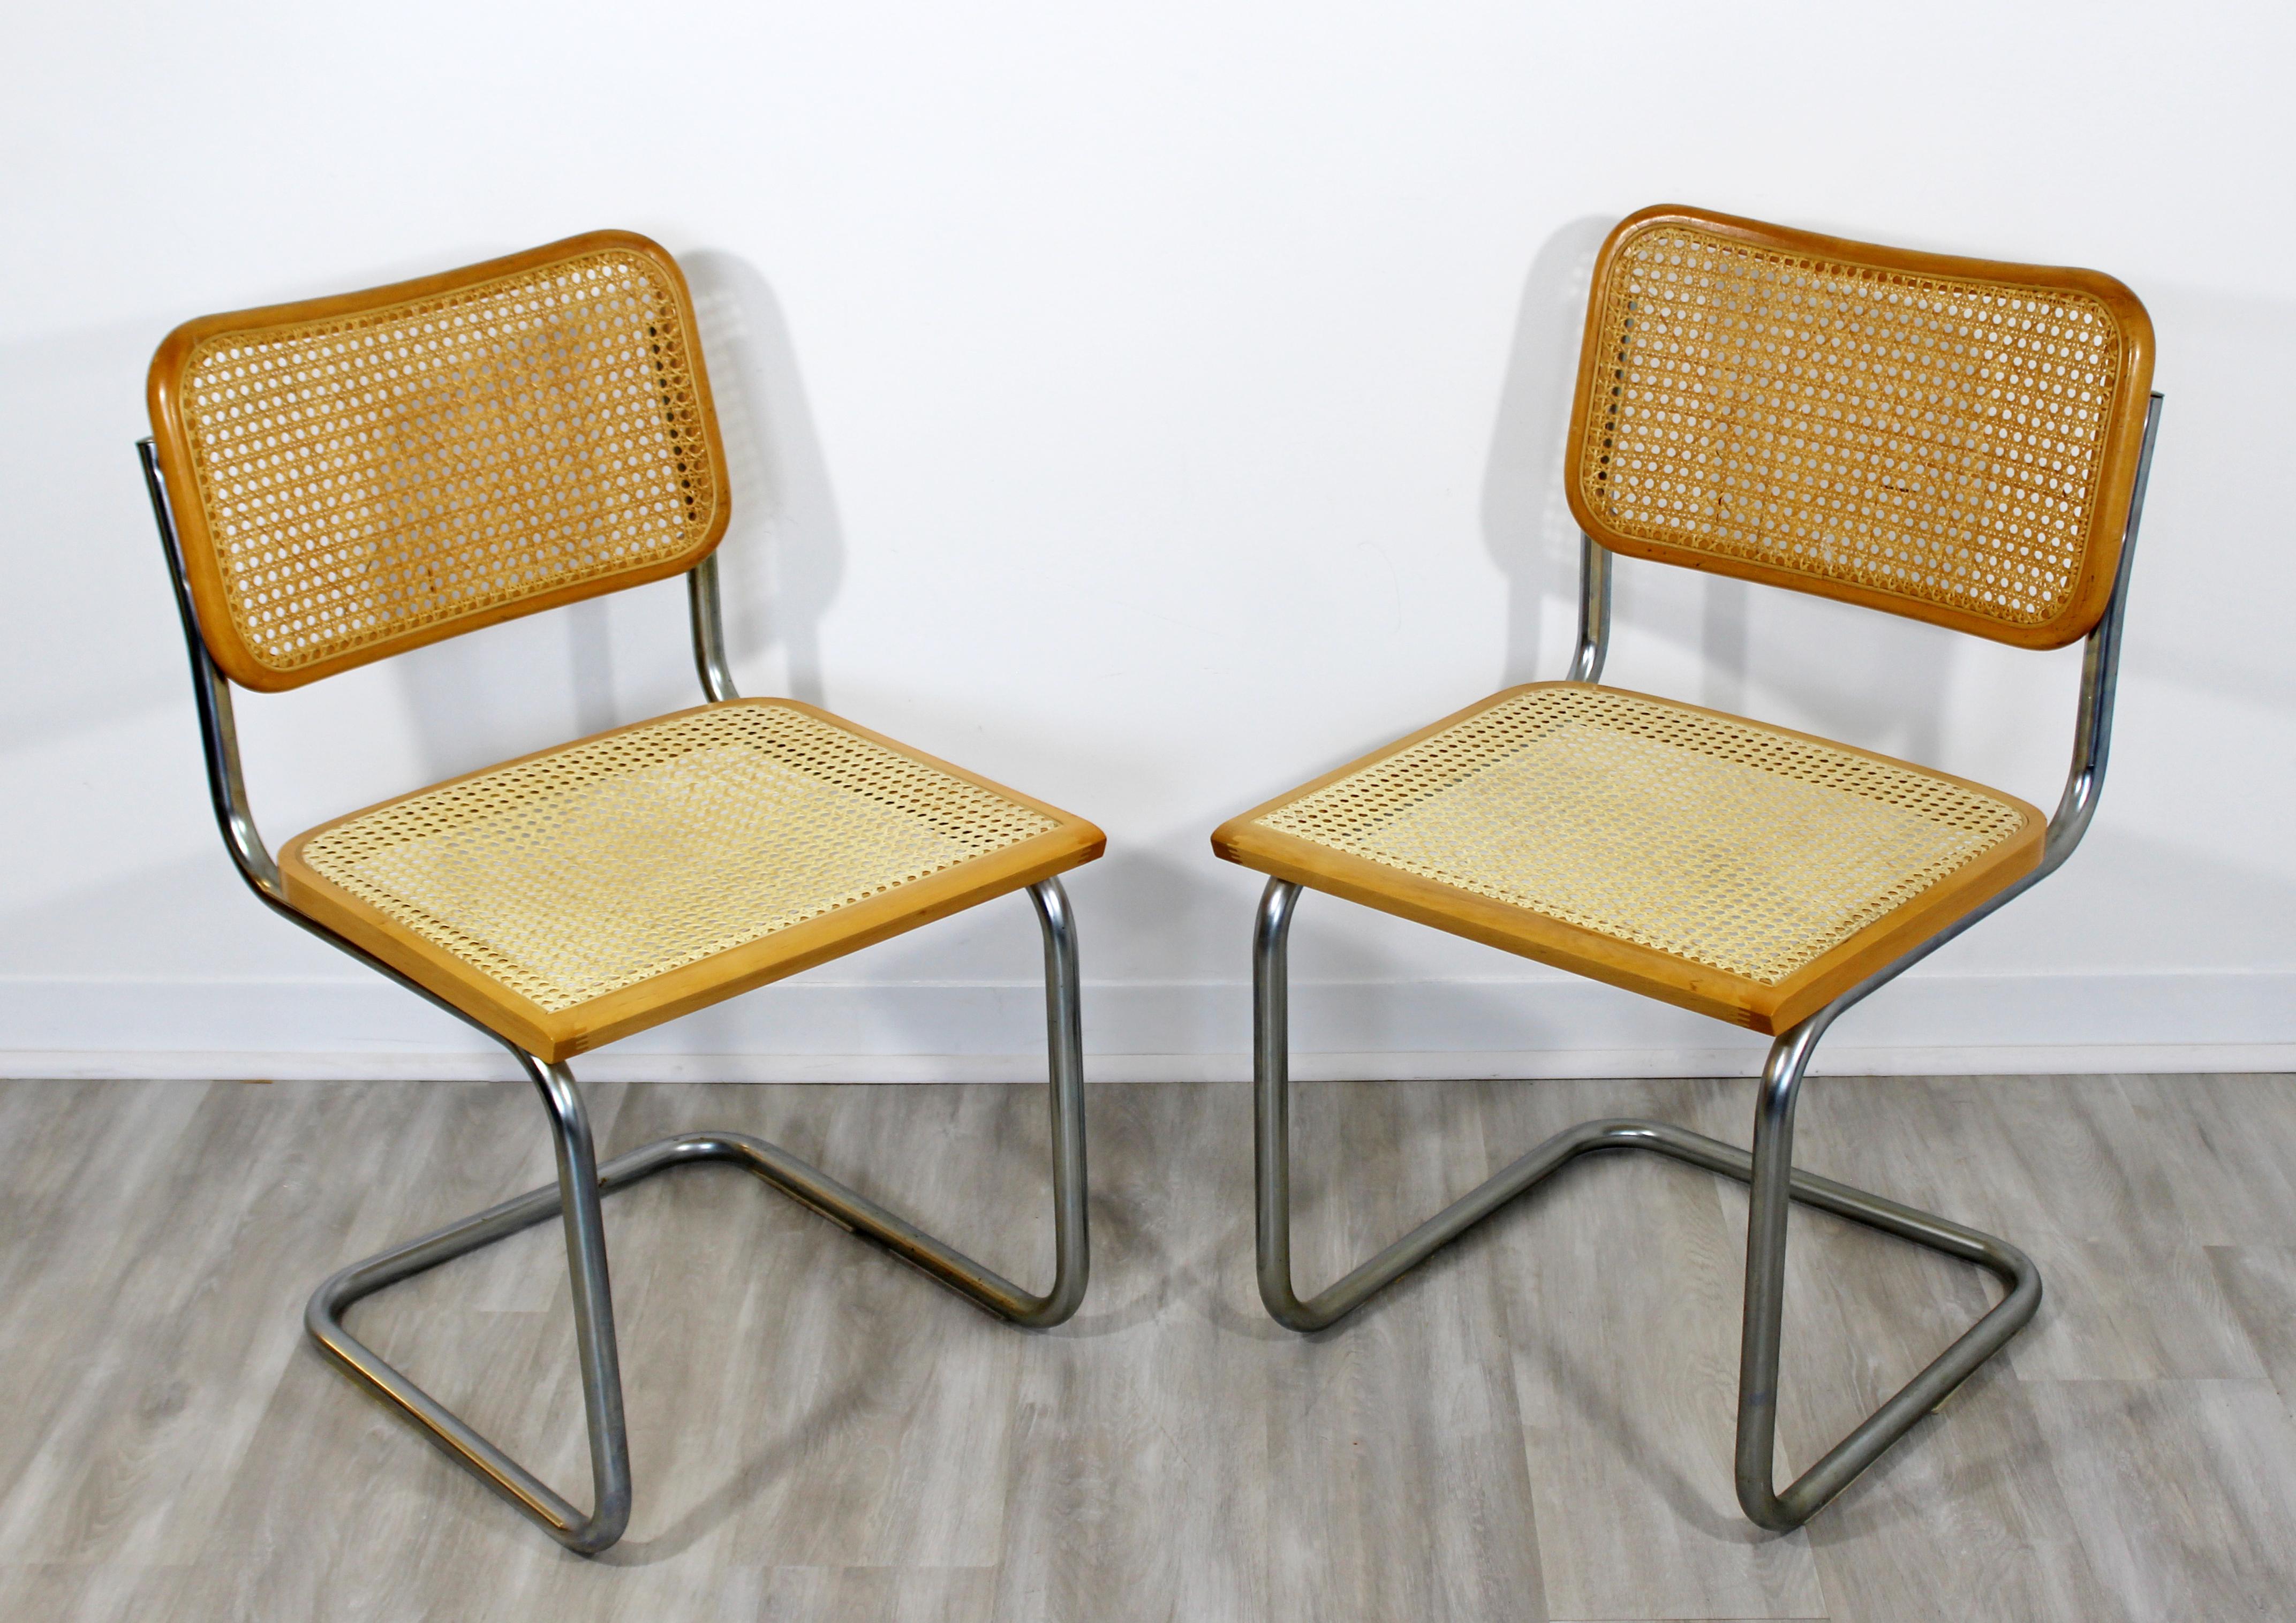 For your consideration is a lovely pair of chrome and rattan, cantilever side chairs, by Marcel Breuer, circa the 1970s. In excellent vintage condition. The dimensions are 18.5